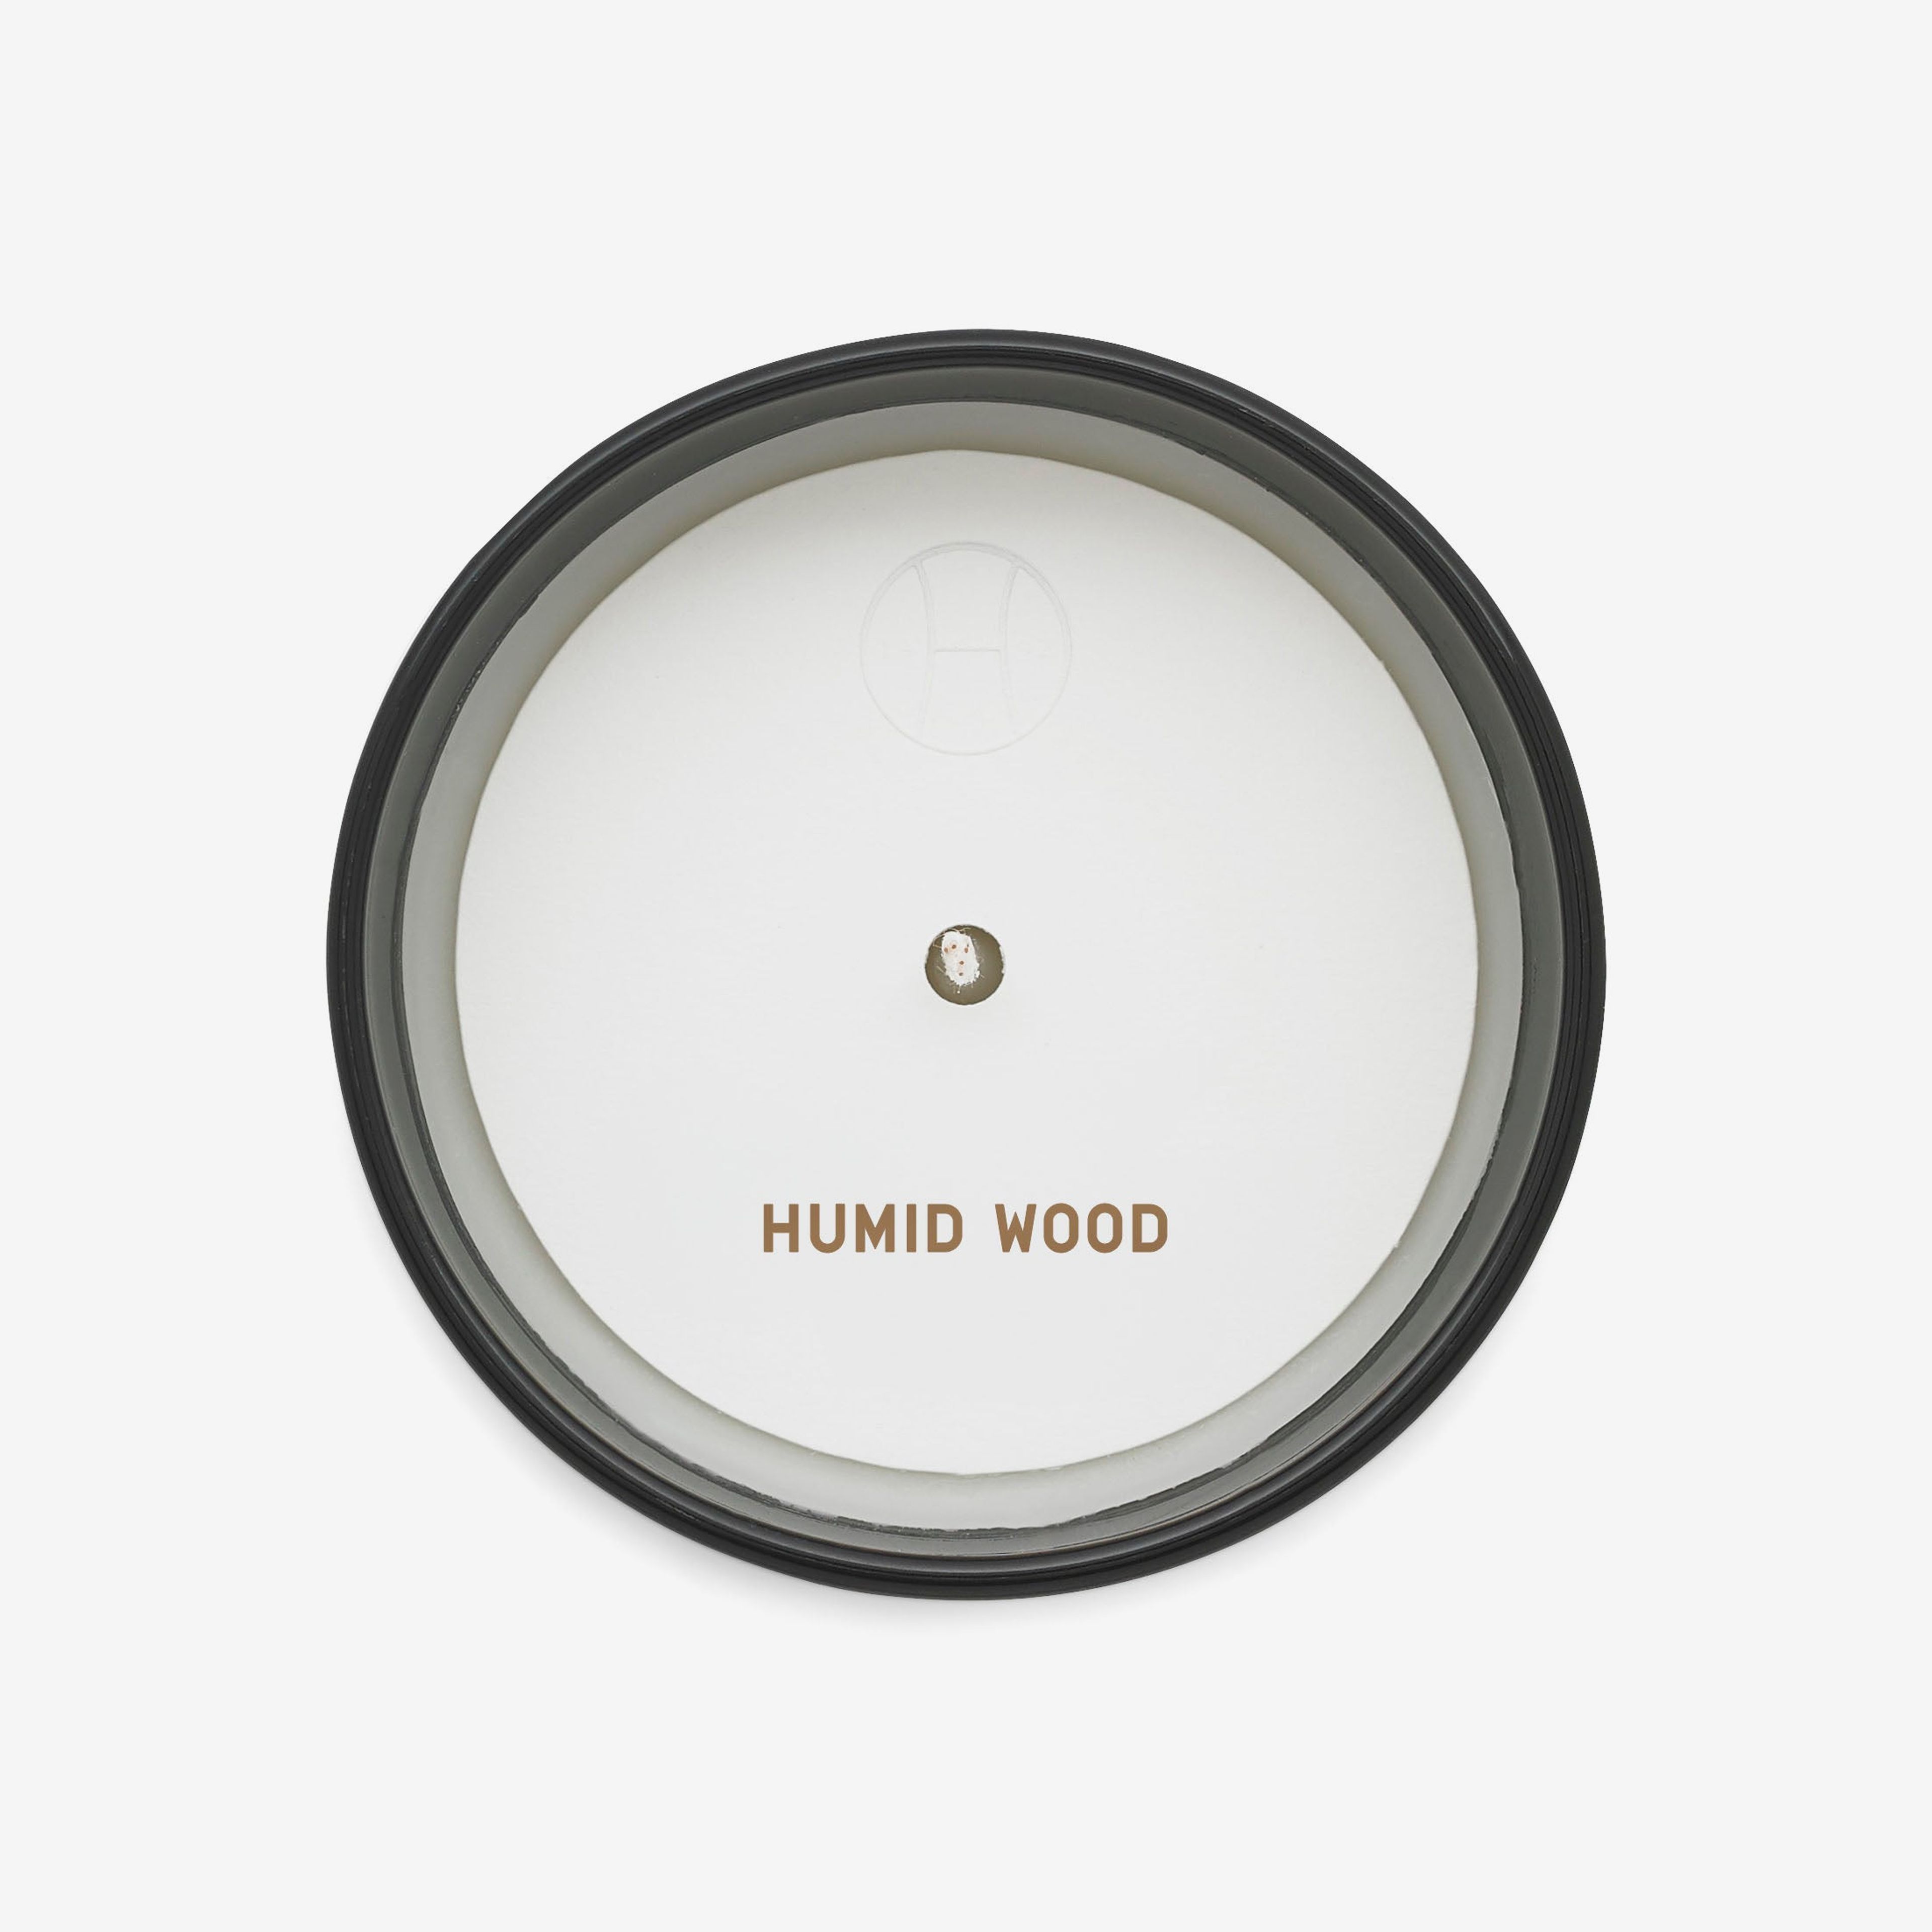 Humid Wood 175g Candle